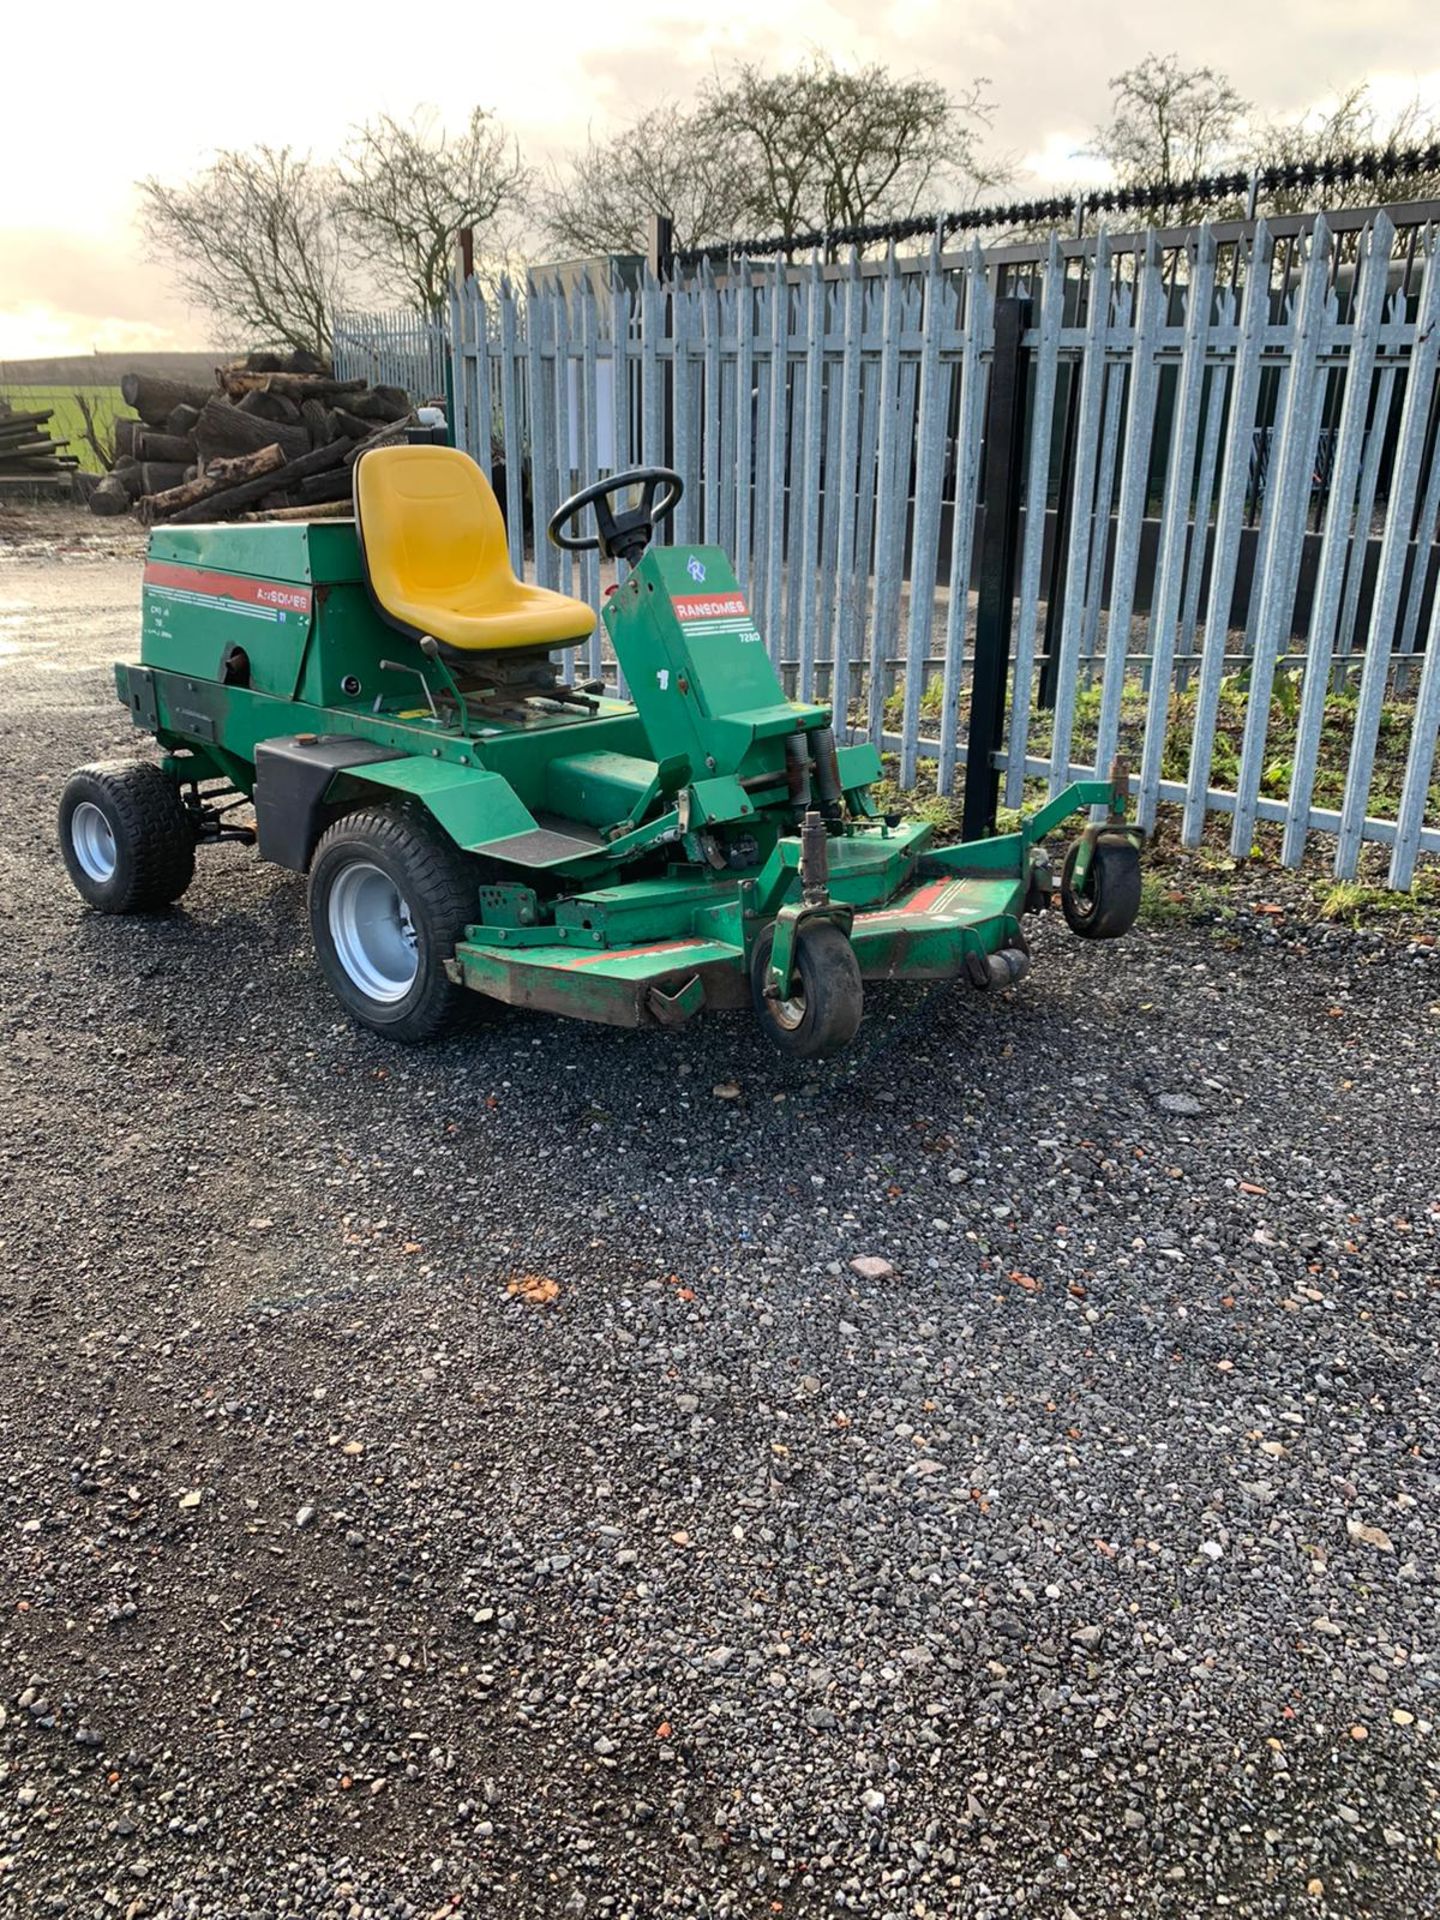 RANSOMES FRONTLINE 728D 4 WHEEL DRIVE DIESEL ROTARY MOWER OUTFRONT DECK 4WD *PLUS VAT*